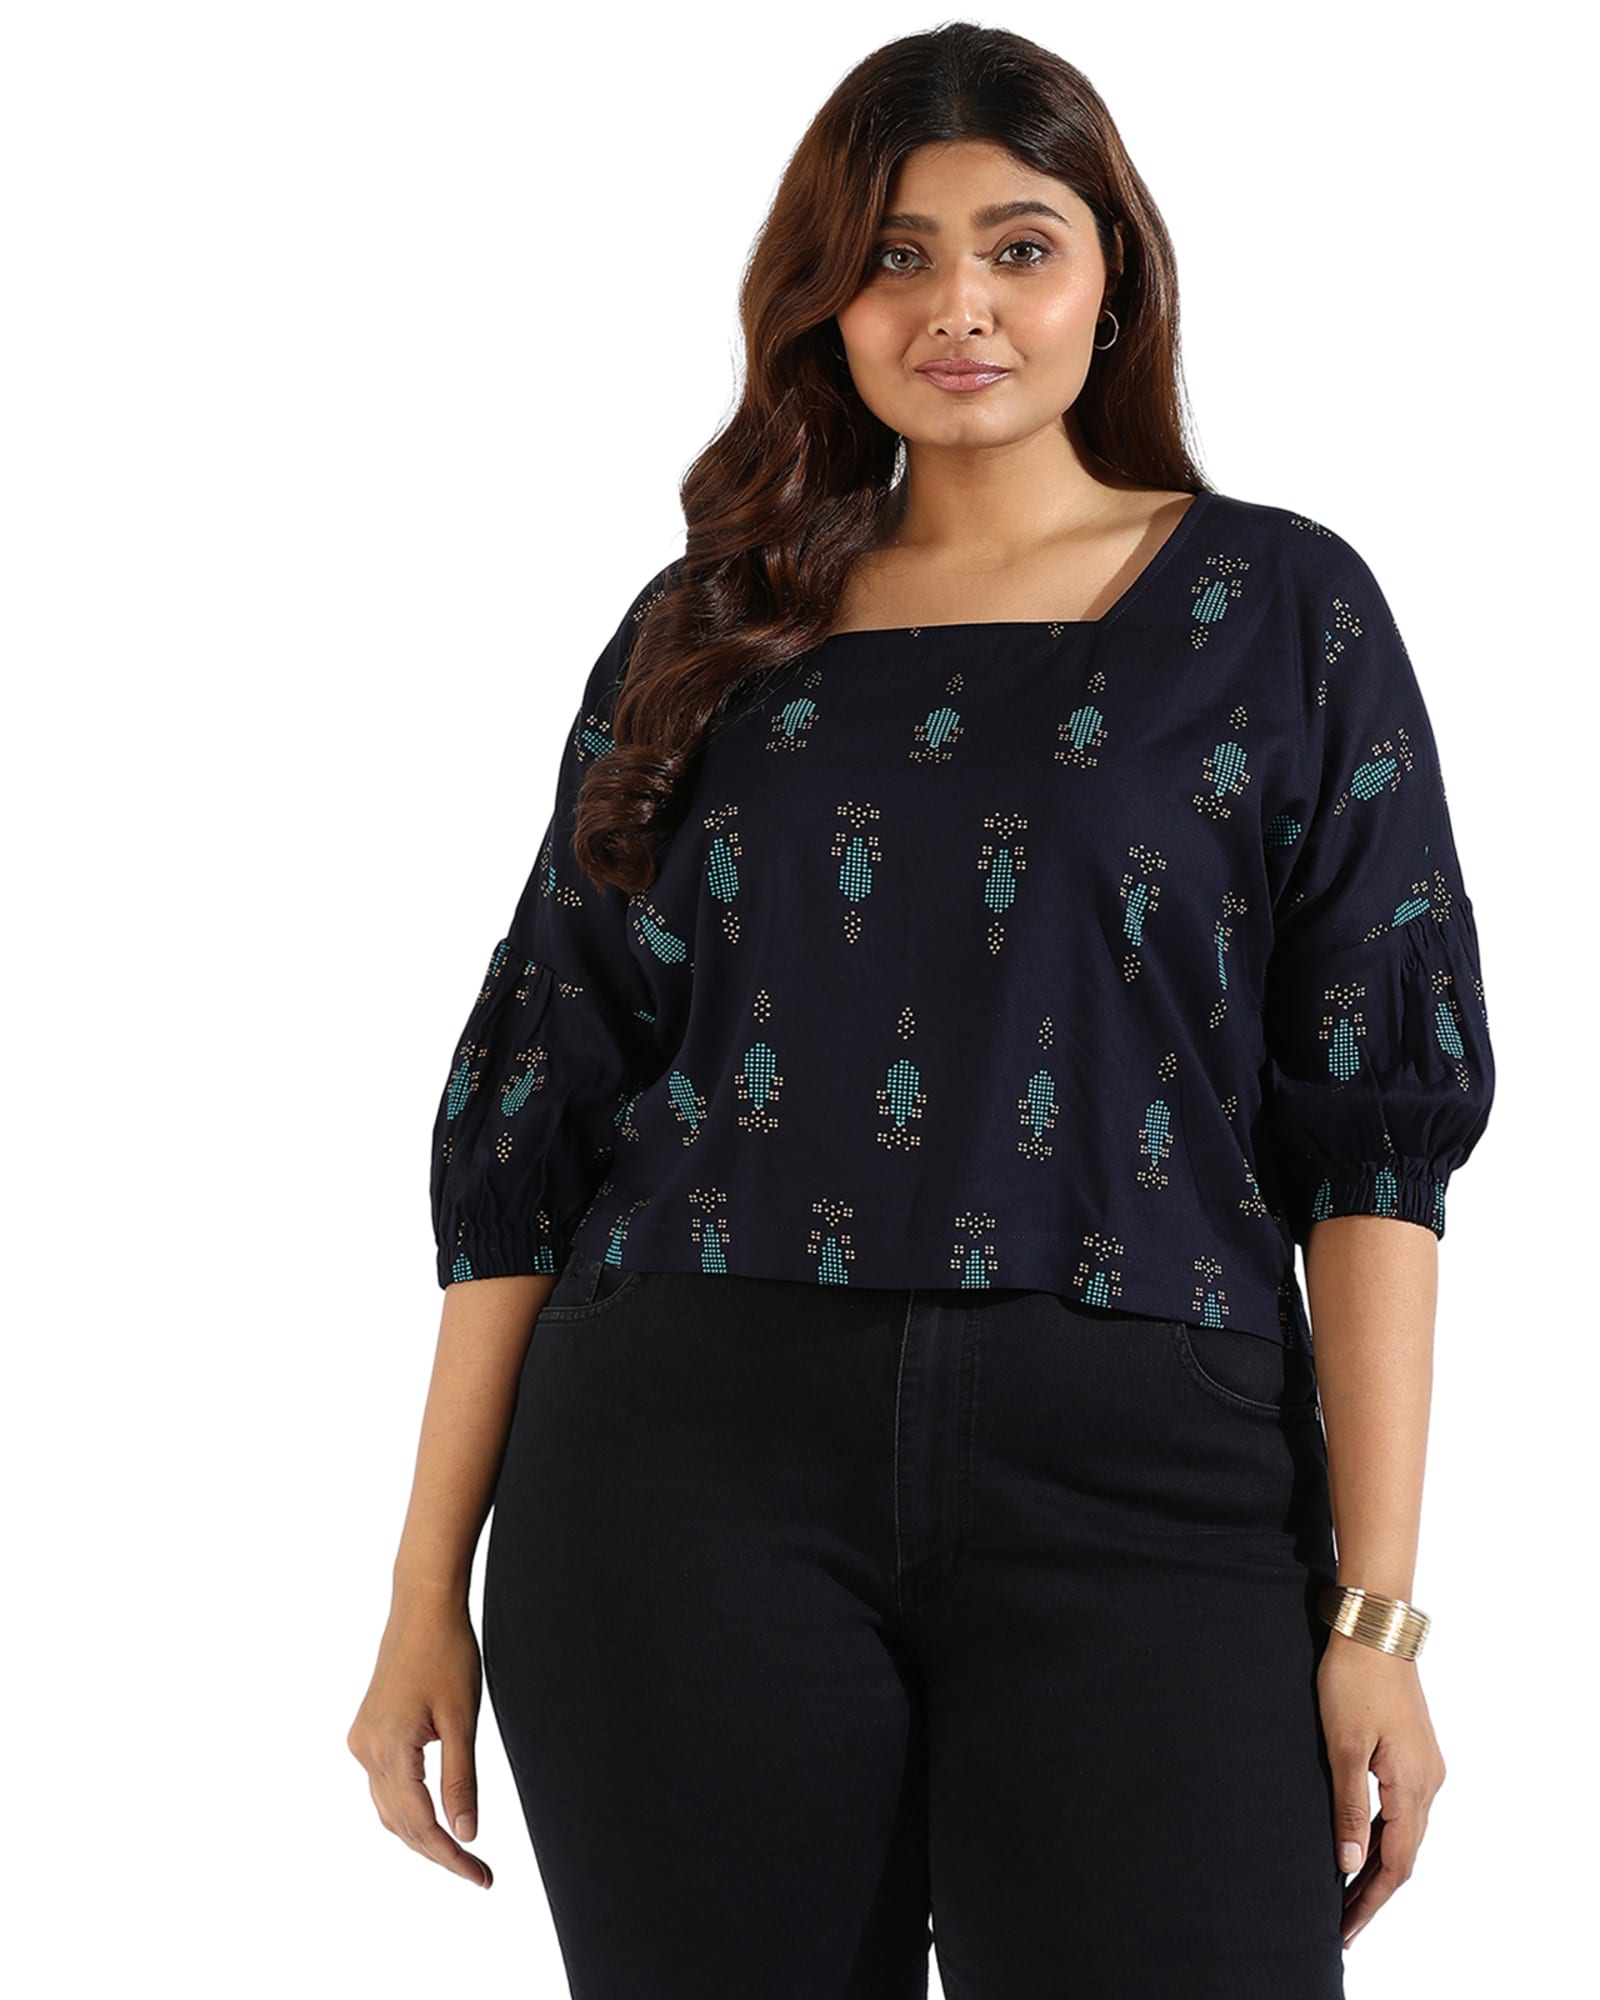 Women Floral Design Casual Tops | Navy